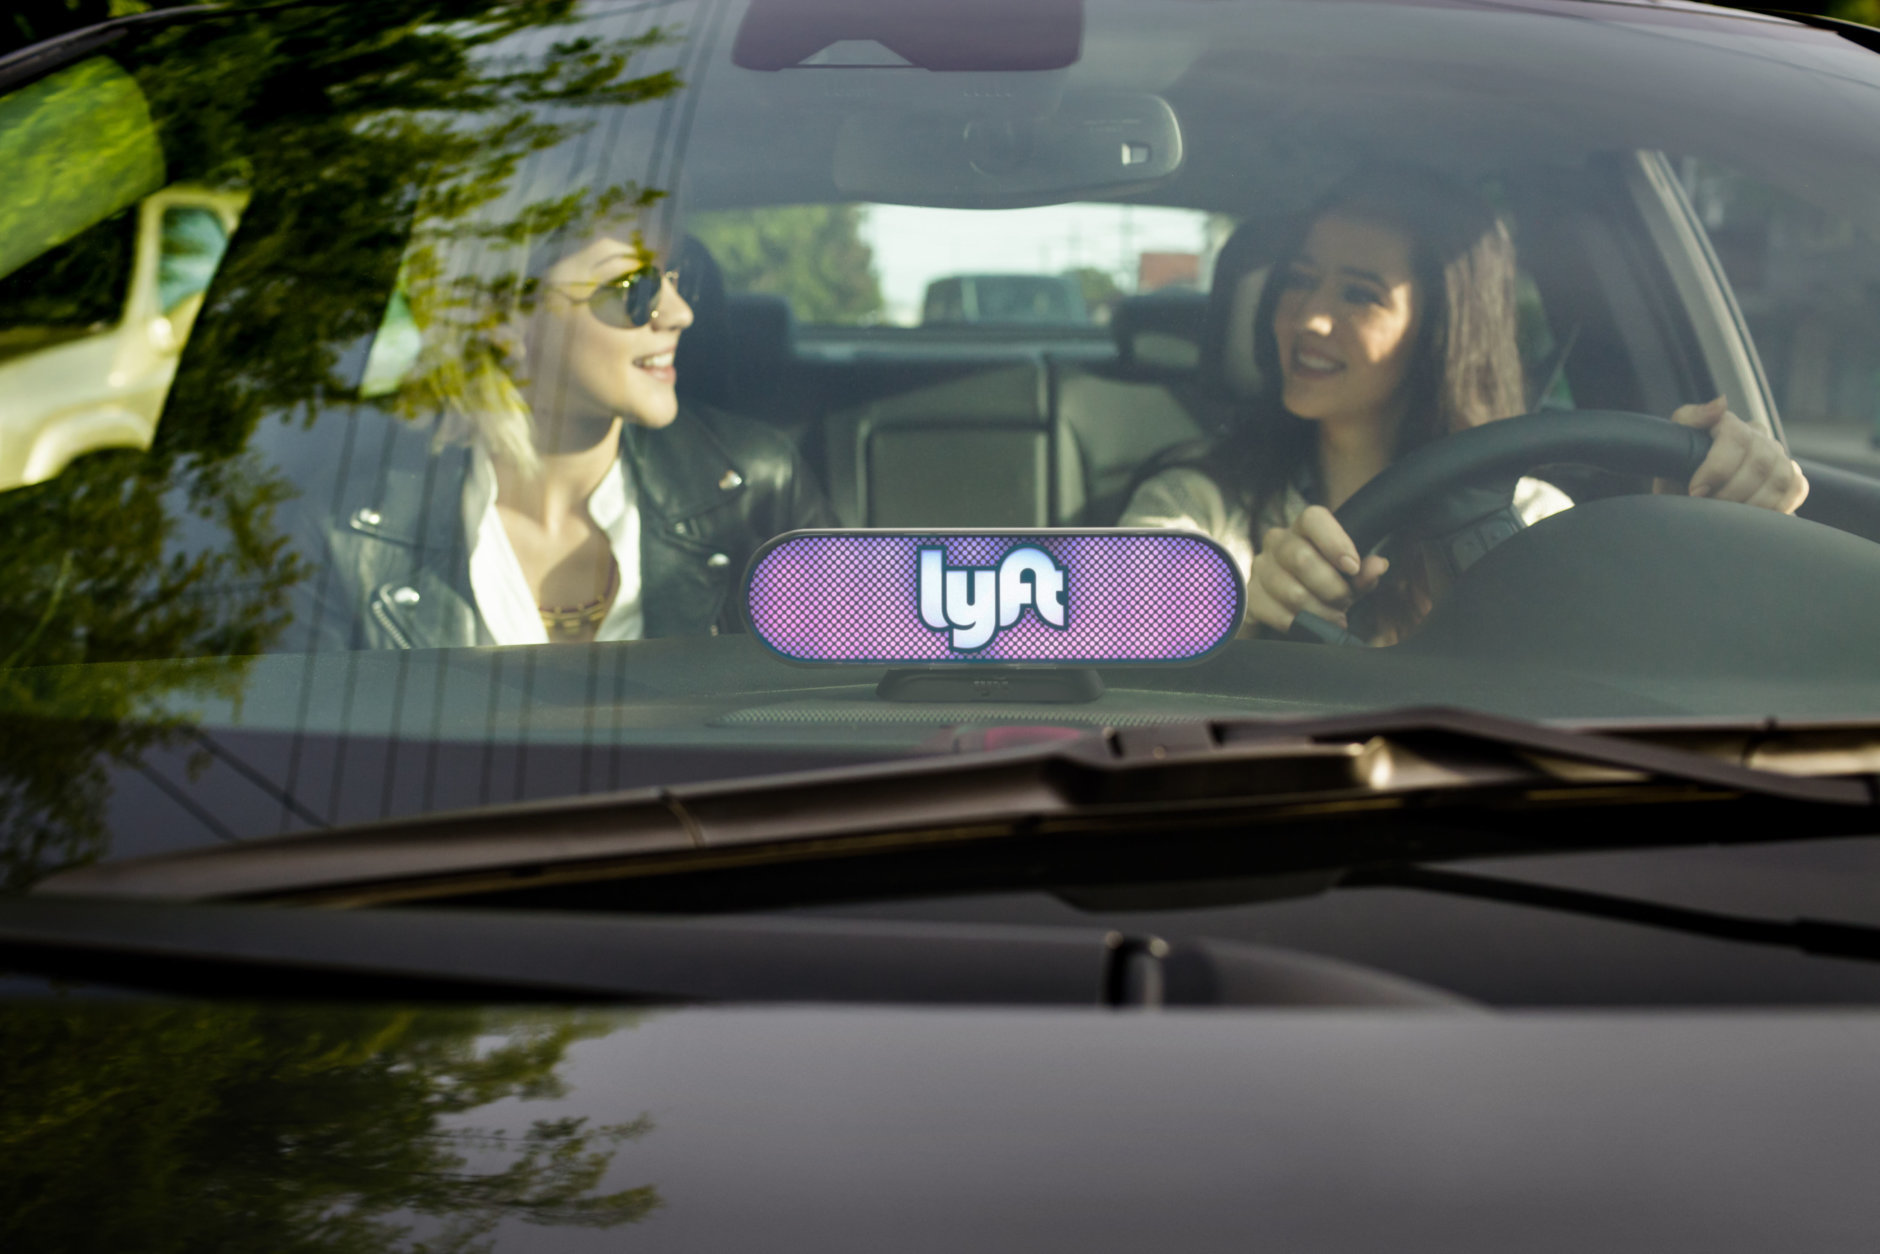 The idea is to make it easier for riders to identify their ride, a feature that could be especially helpful outside of bars, restaurants or events where there are multiple people waiting for. (Courtesy Lyft)